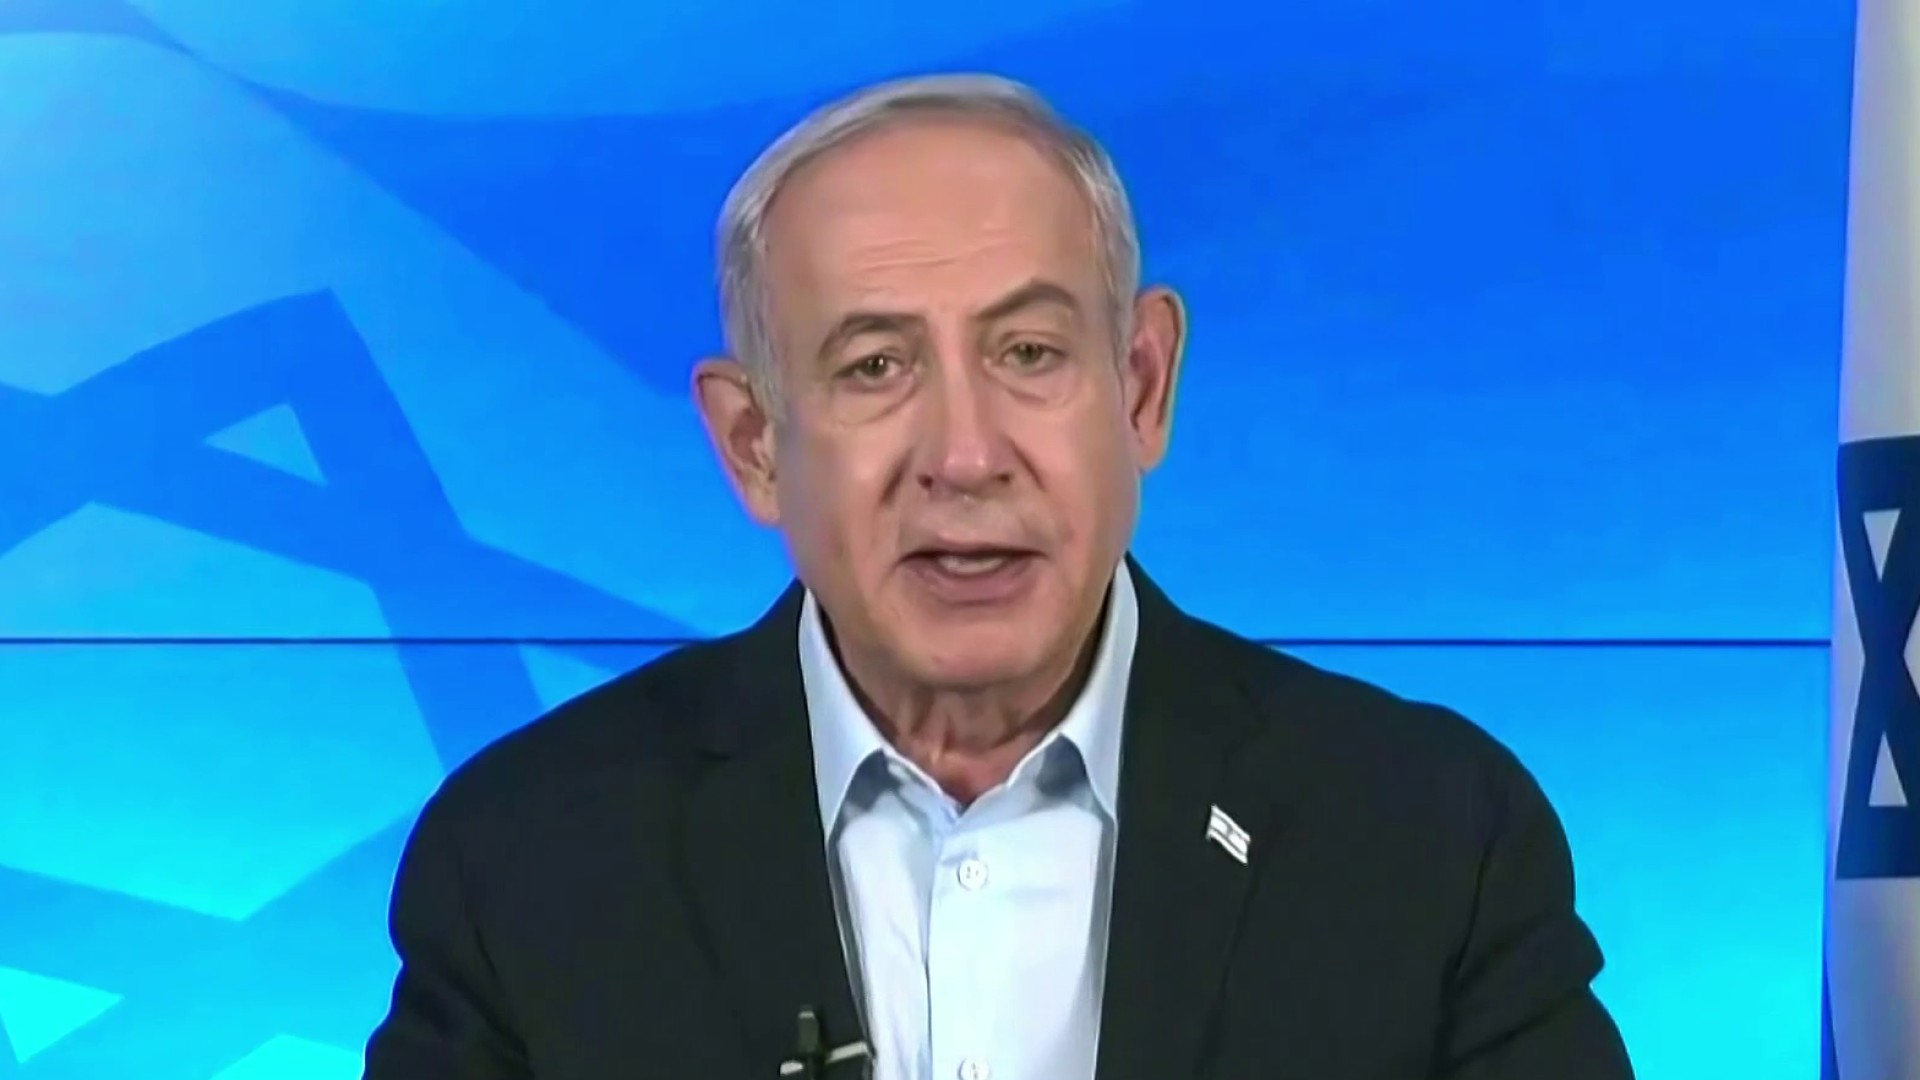 Netanyahu to students ‘protesting for Hamas’: Would you ‘protest against the Nazis?’